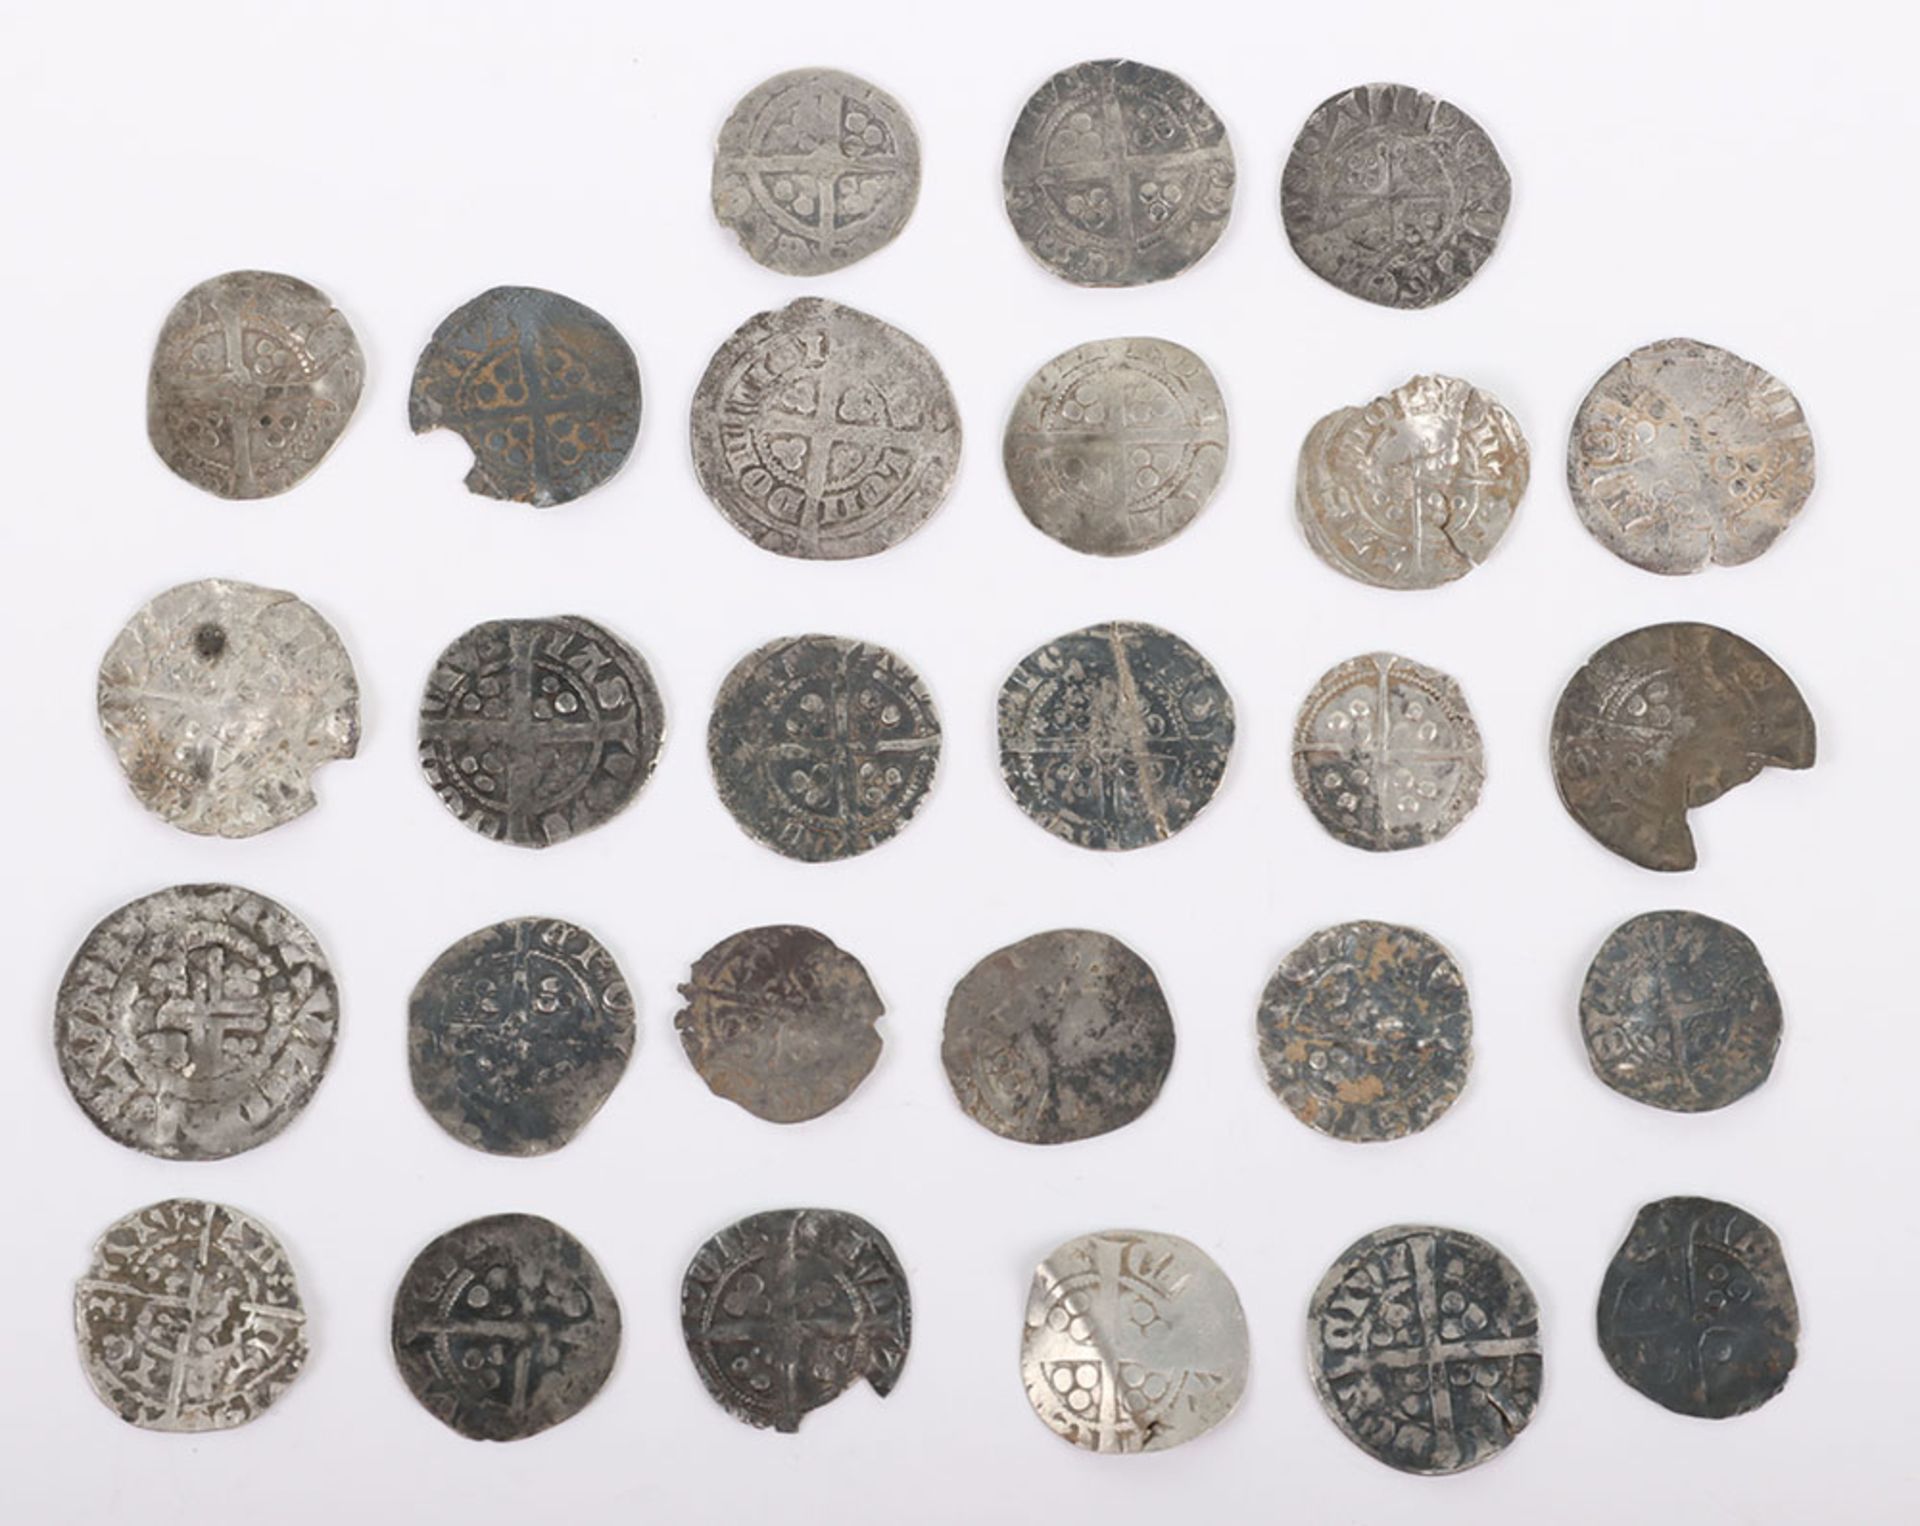 Twenty seven hammered pennies and groats, some fragmented - Image 2 of 2